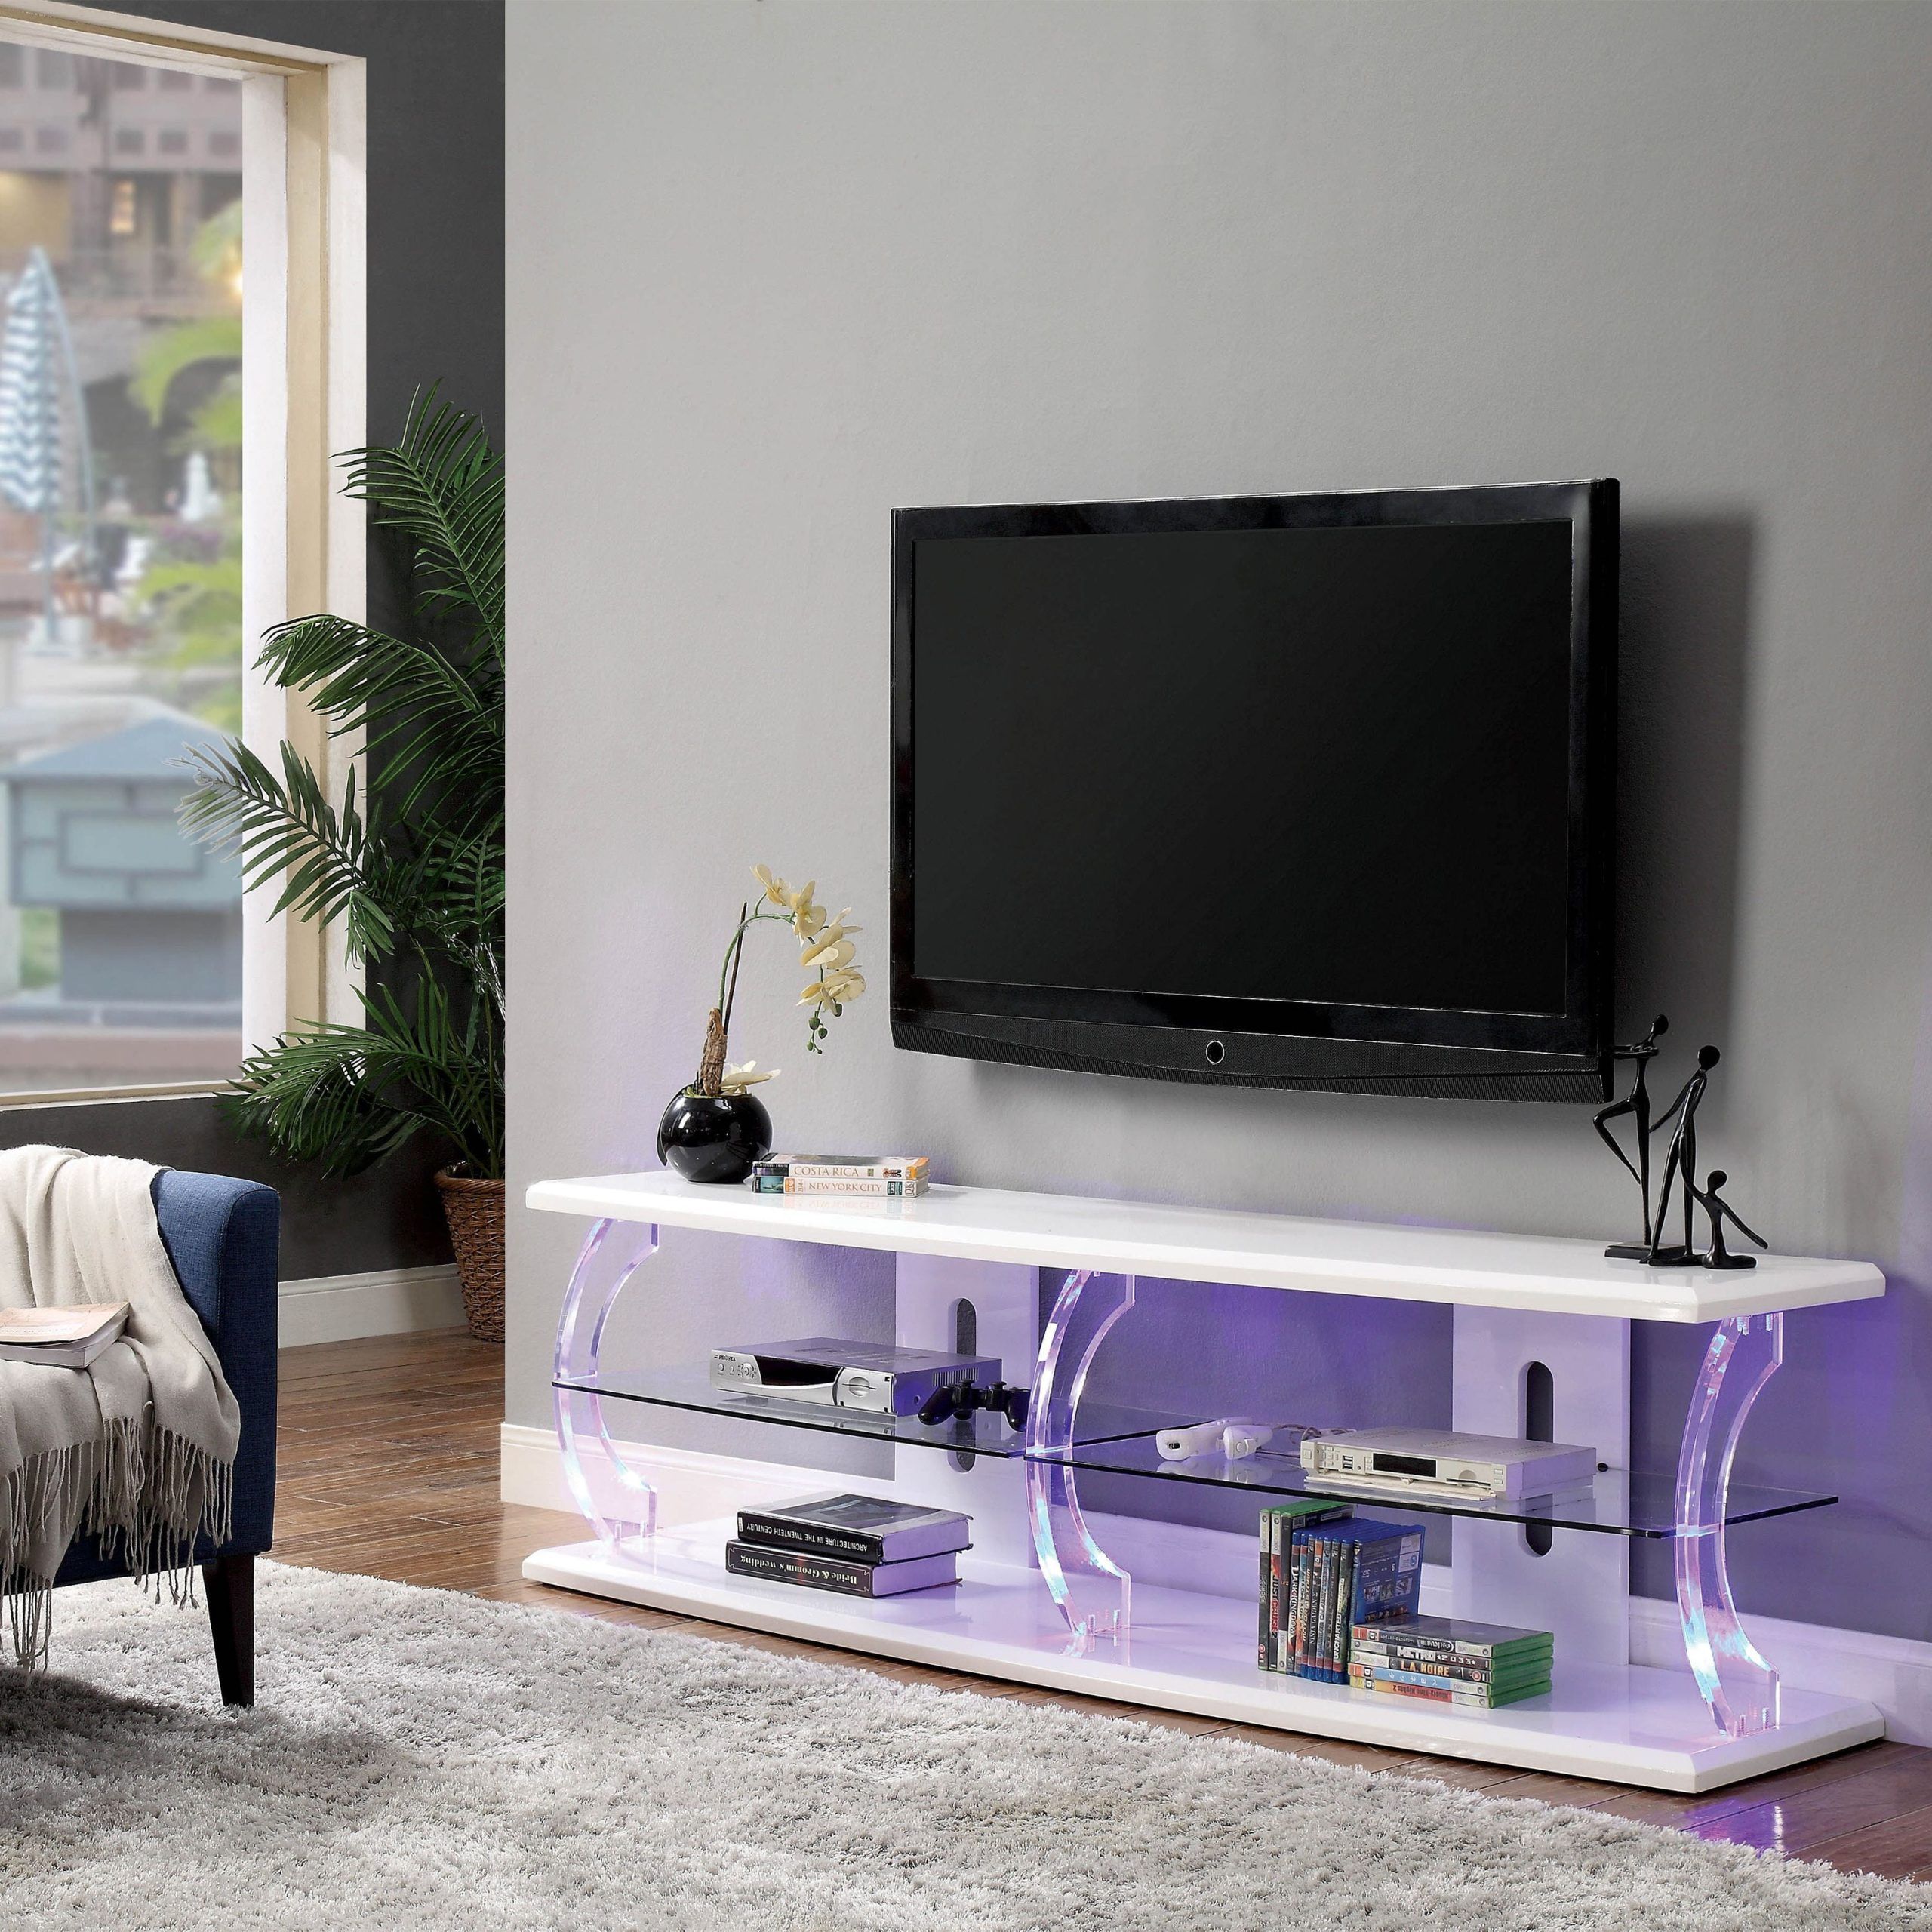 Furniture Of America Vedot Contemporary Led Tv Stand, 72", White And Regarding Tv Stands With Lights (View 14 of 20)